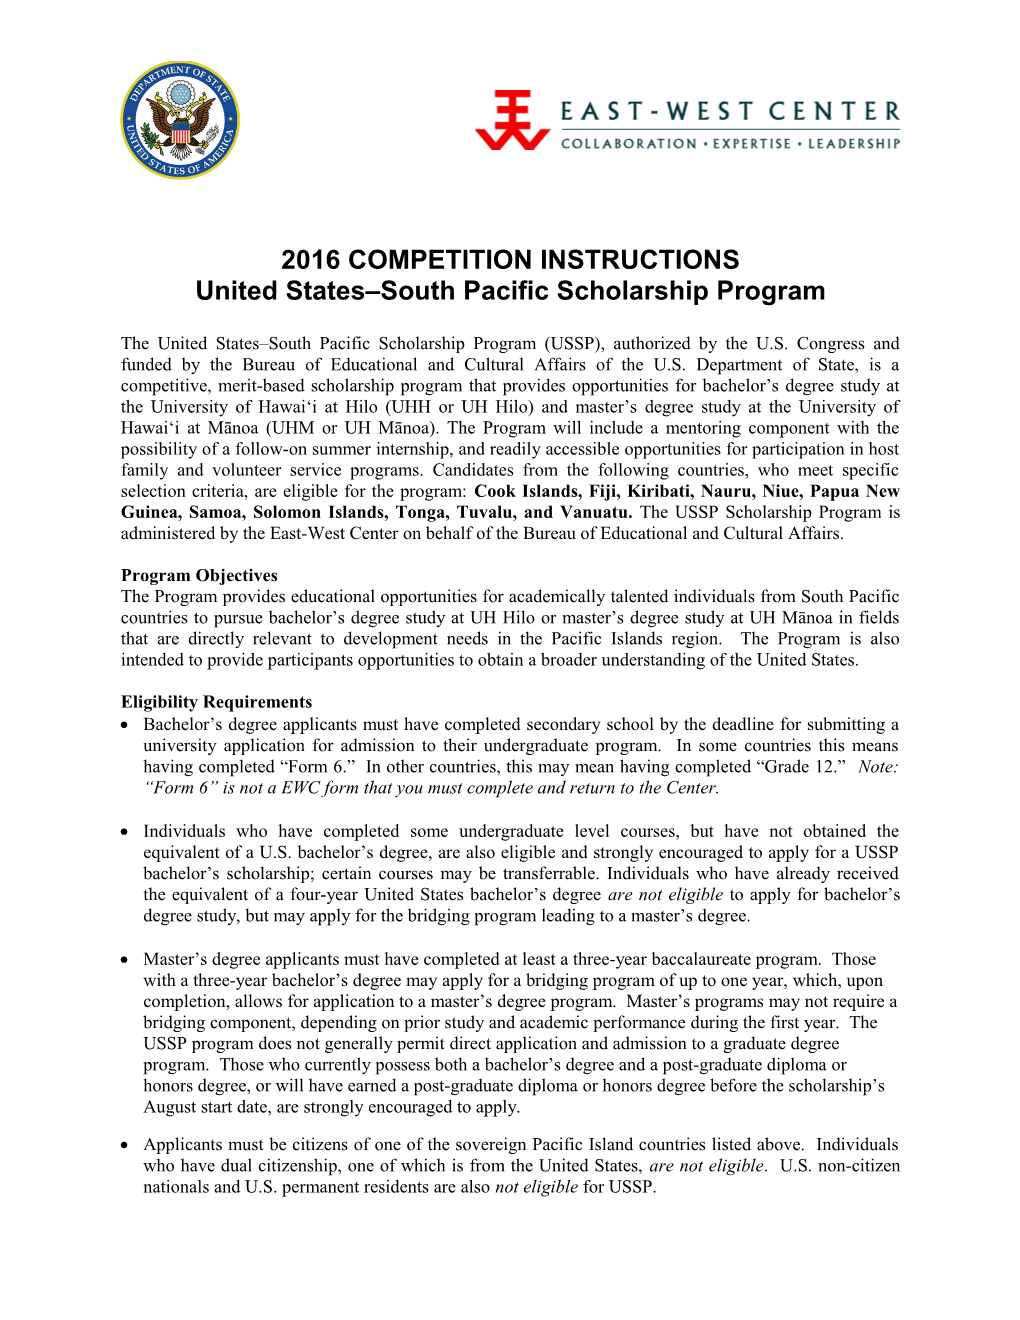 USSP 2016 Competition Instructions